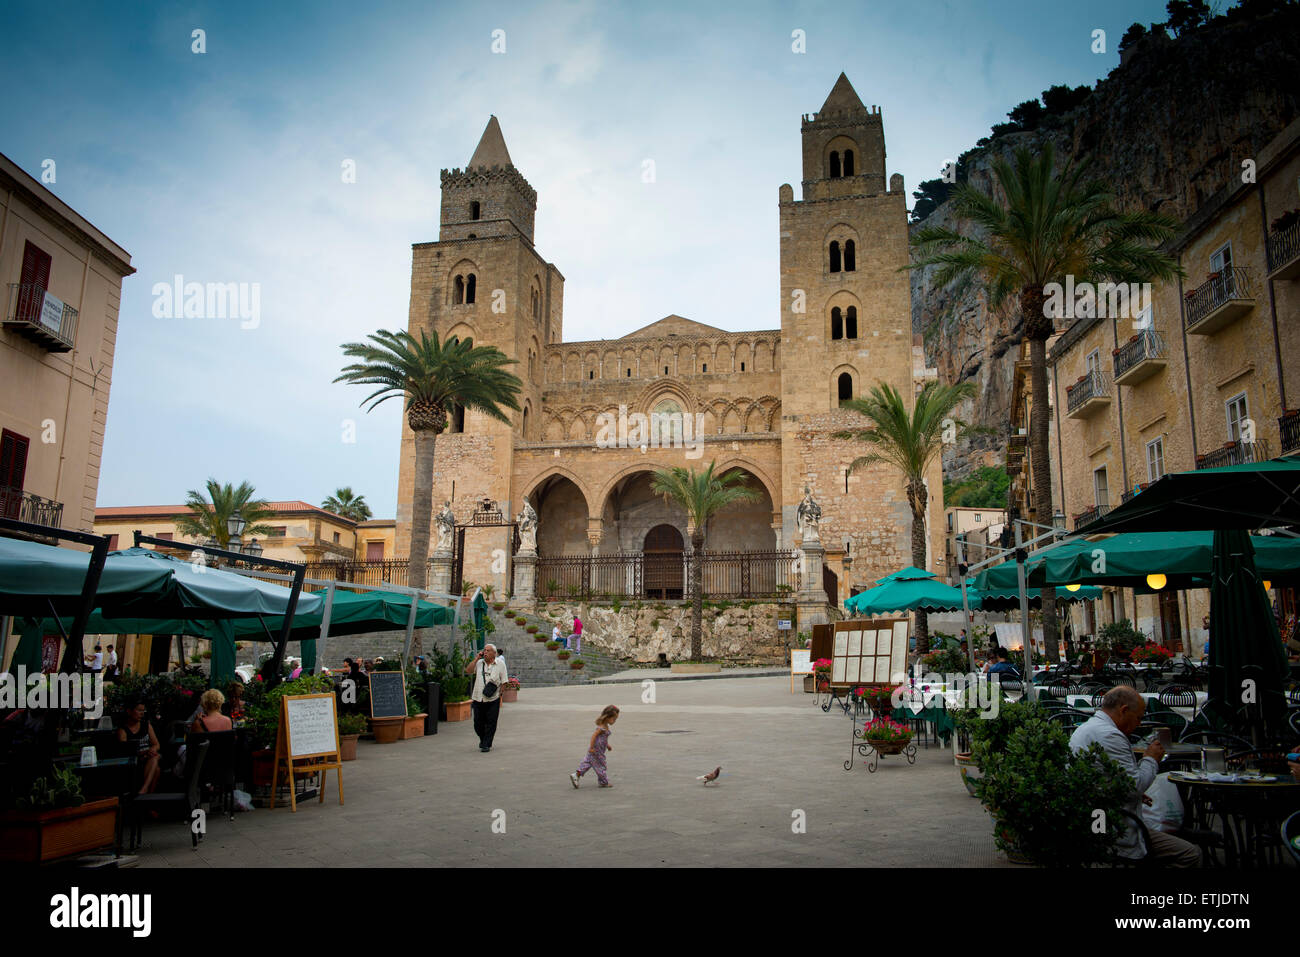 The Duomo cathedral. Cefalu, Sicily Stock Photo